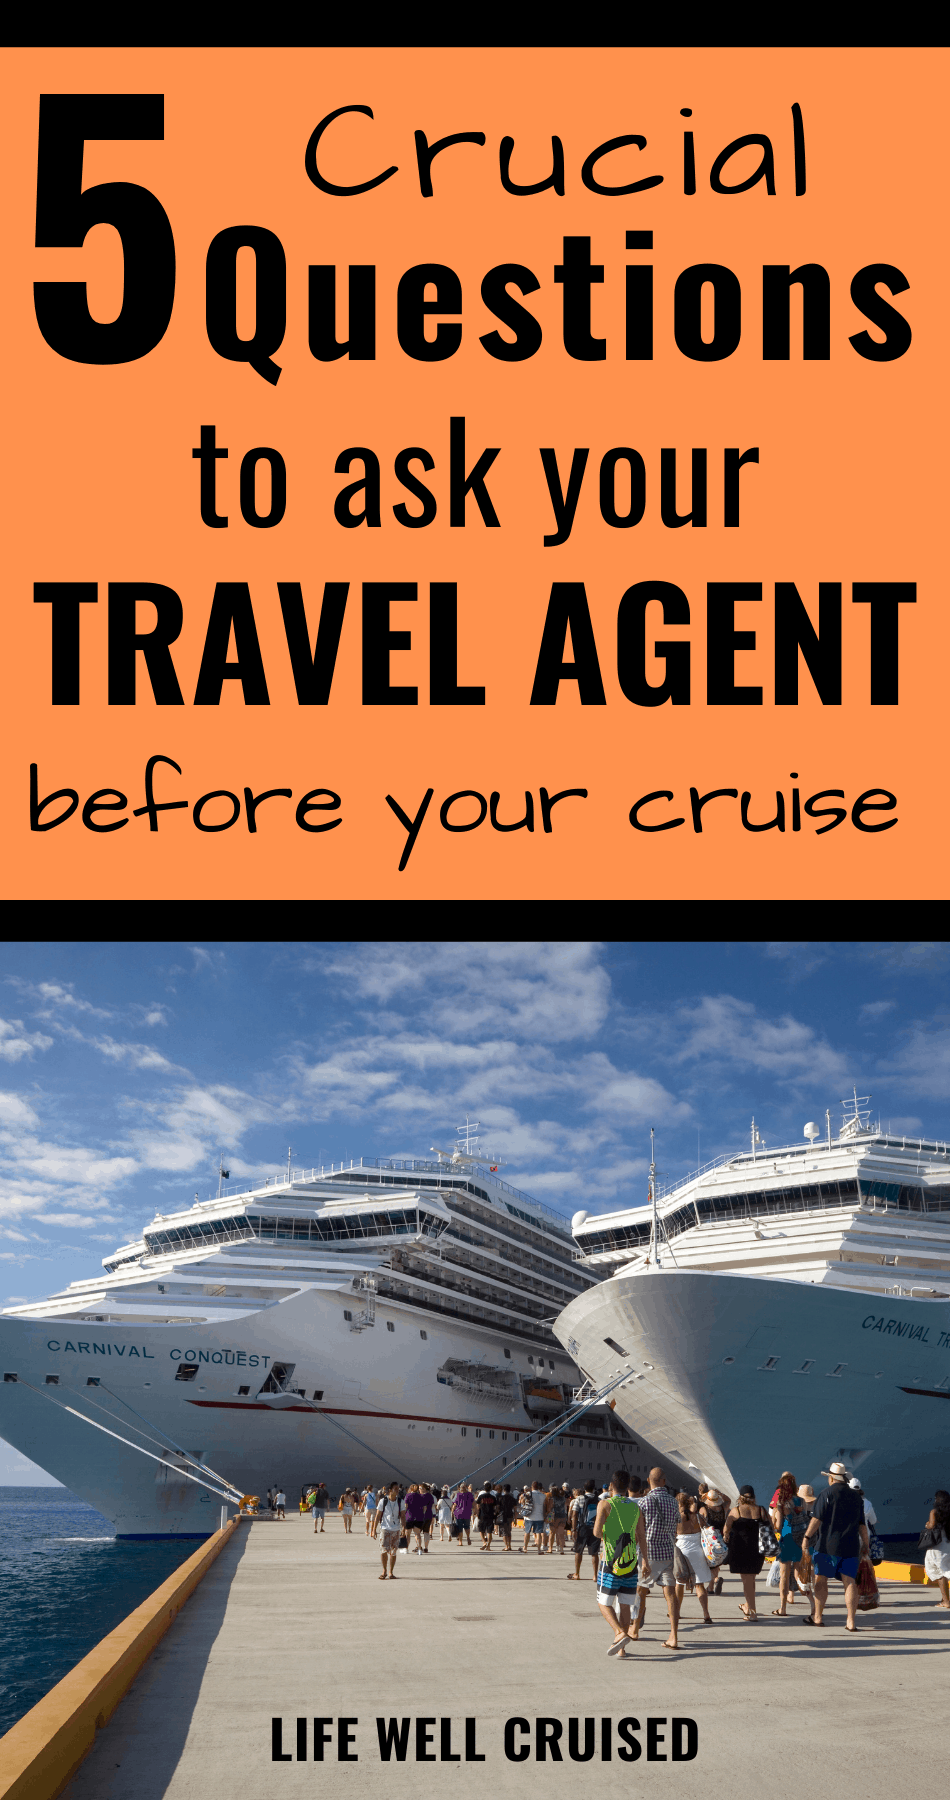 book direct with cruise line or travel agent